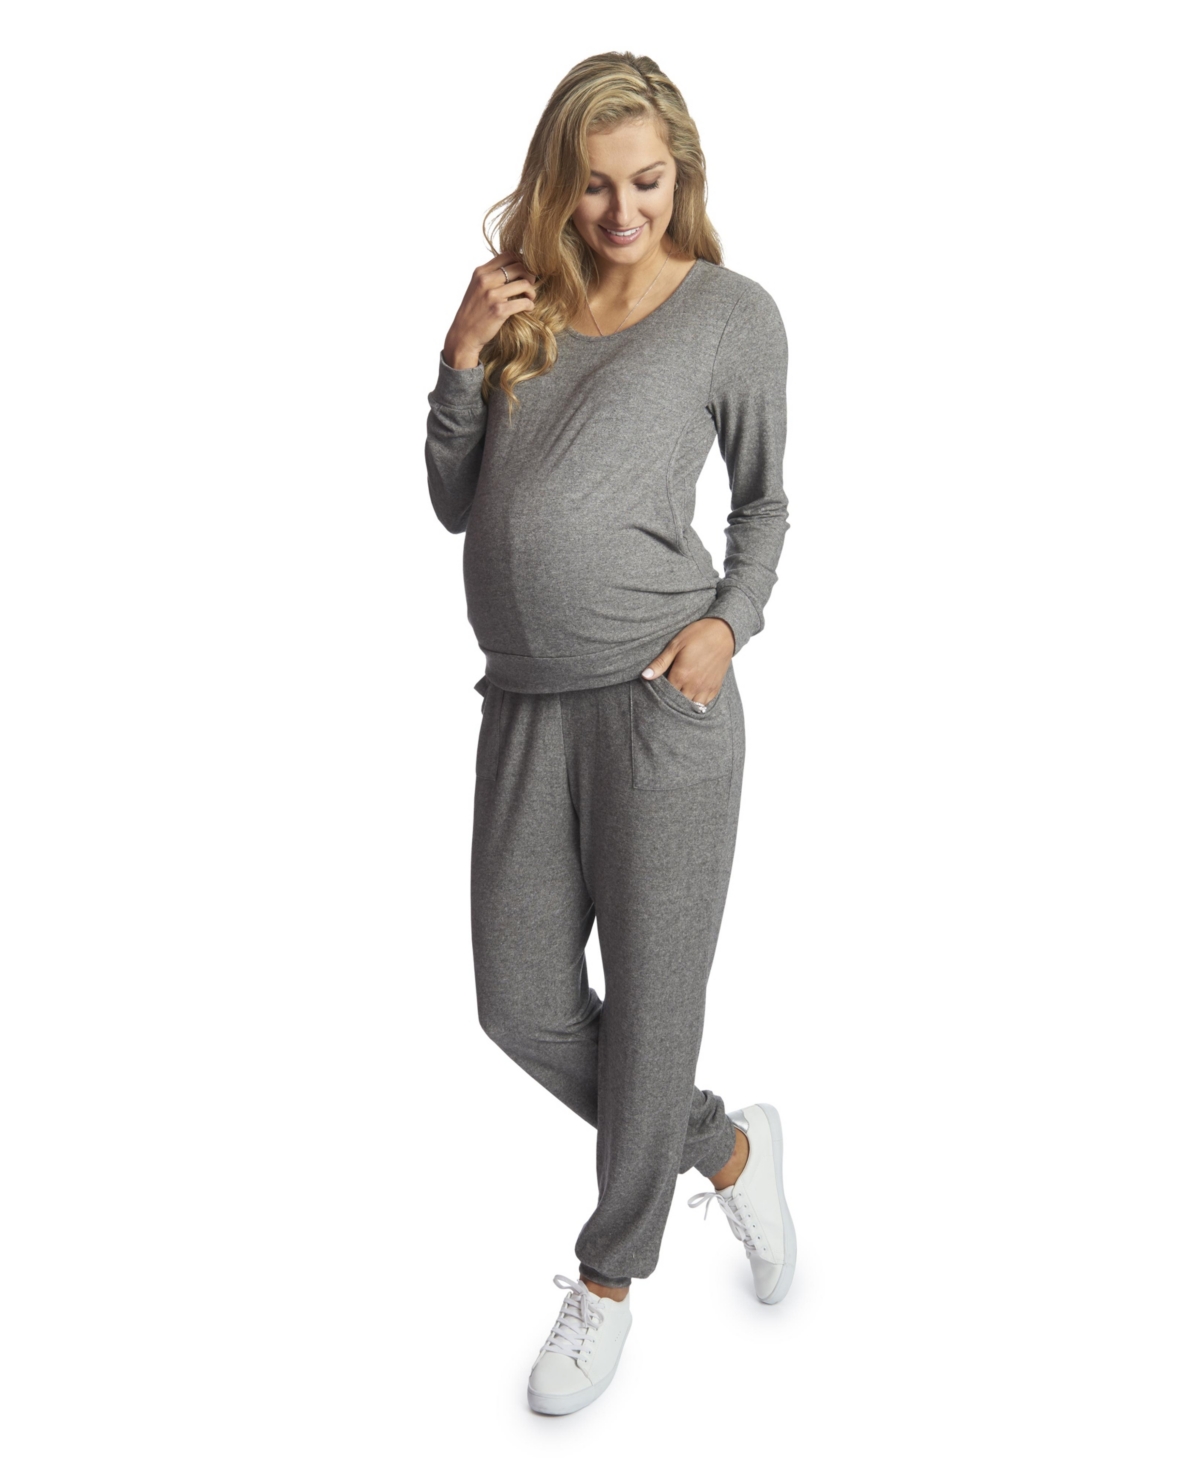 Everly Grey Maternity Whitney 2-Piece /Nursing Top & Pant Set - French  Terry Black